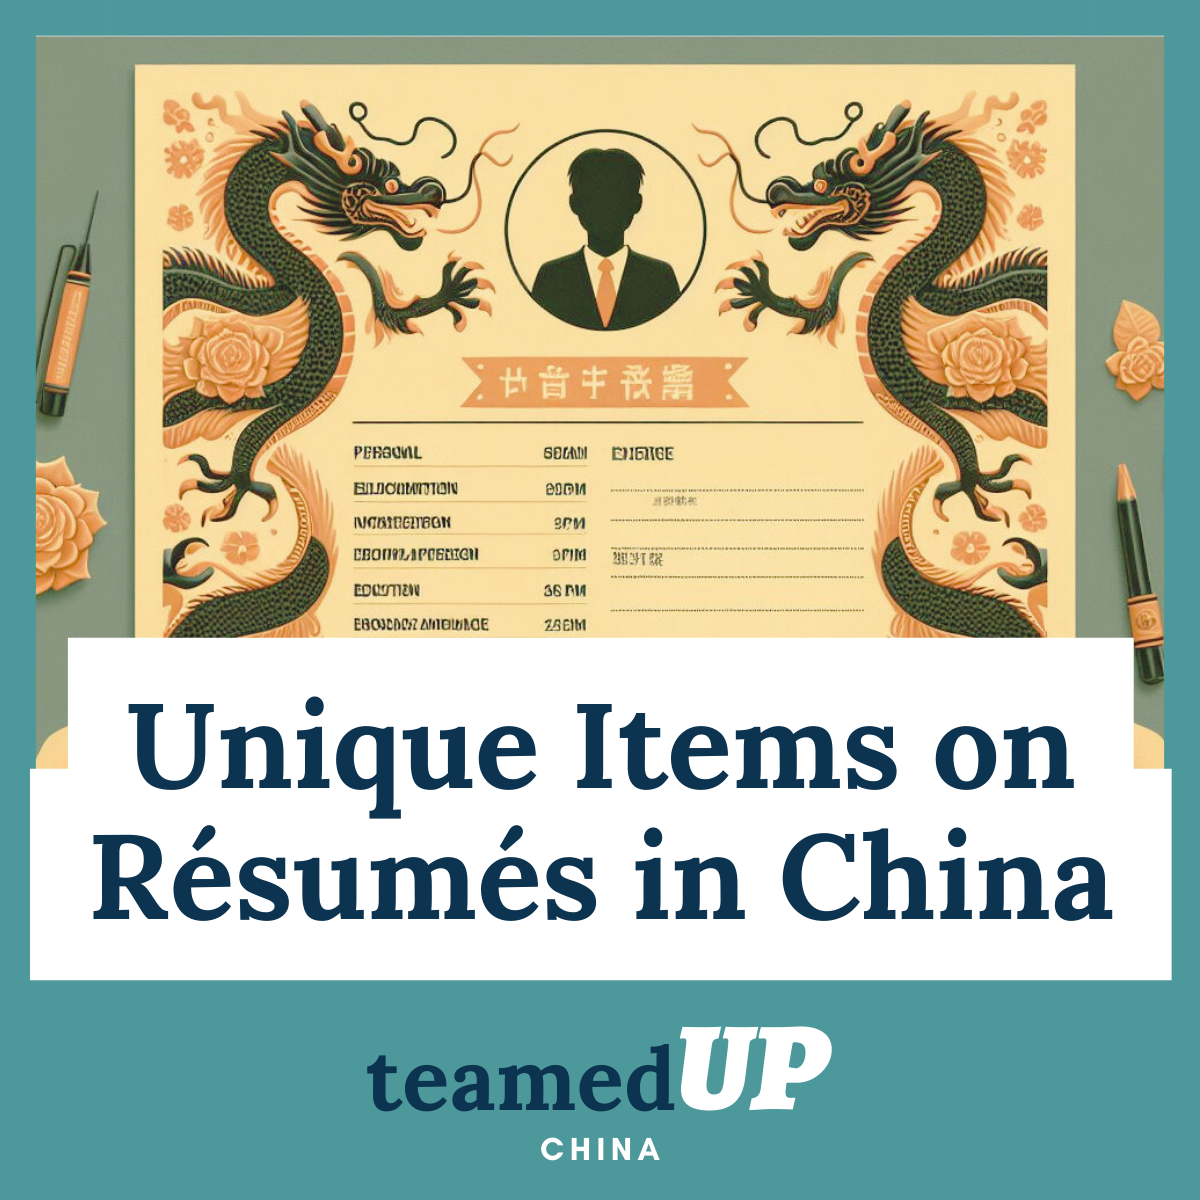 Items on Resumes in China